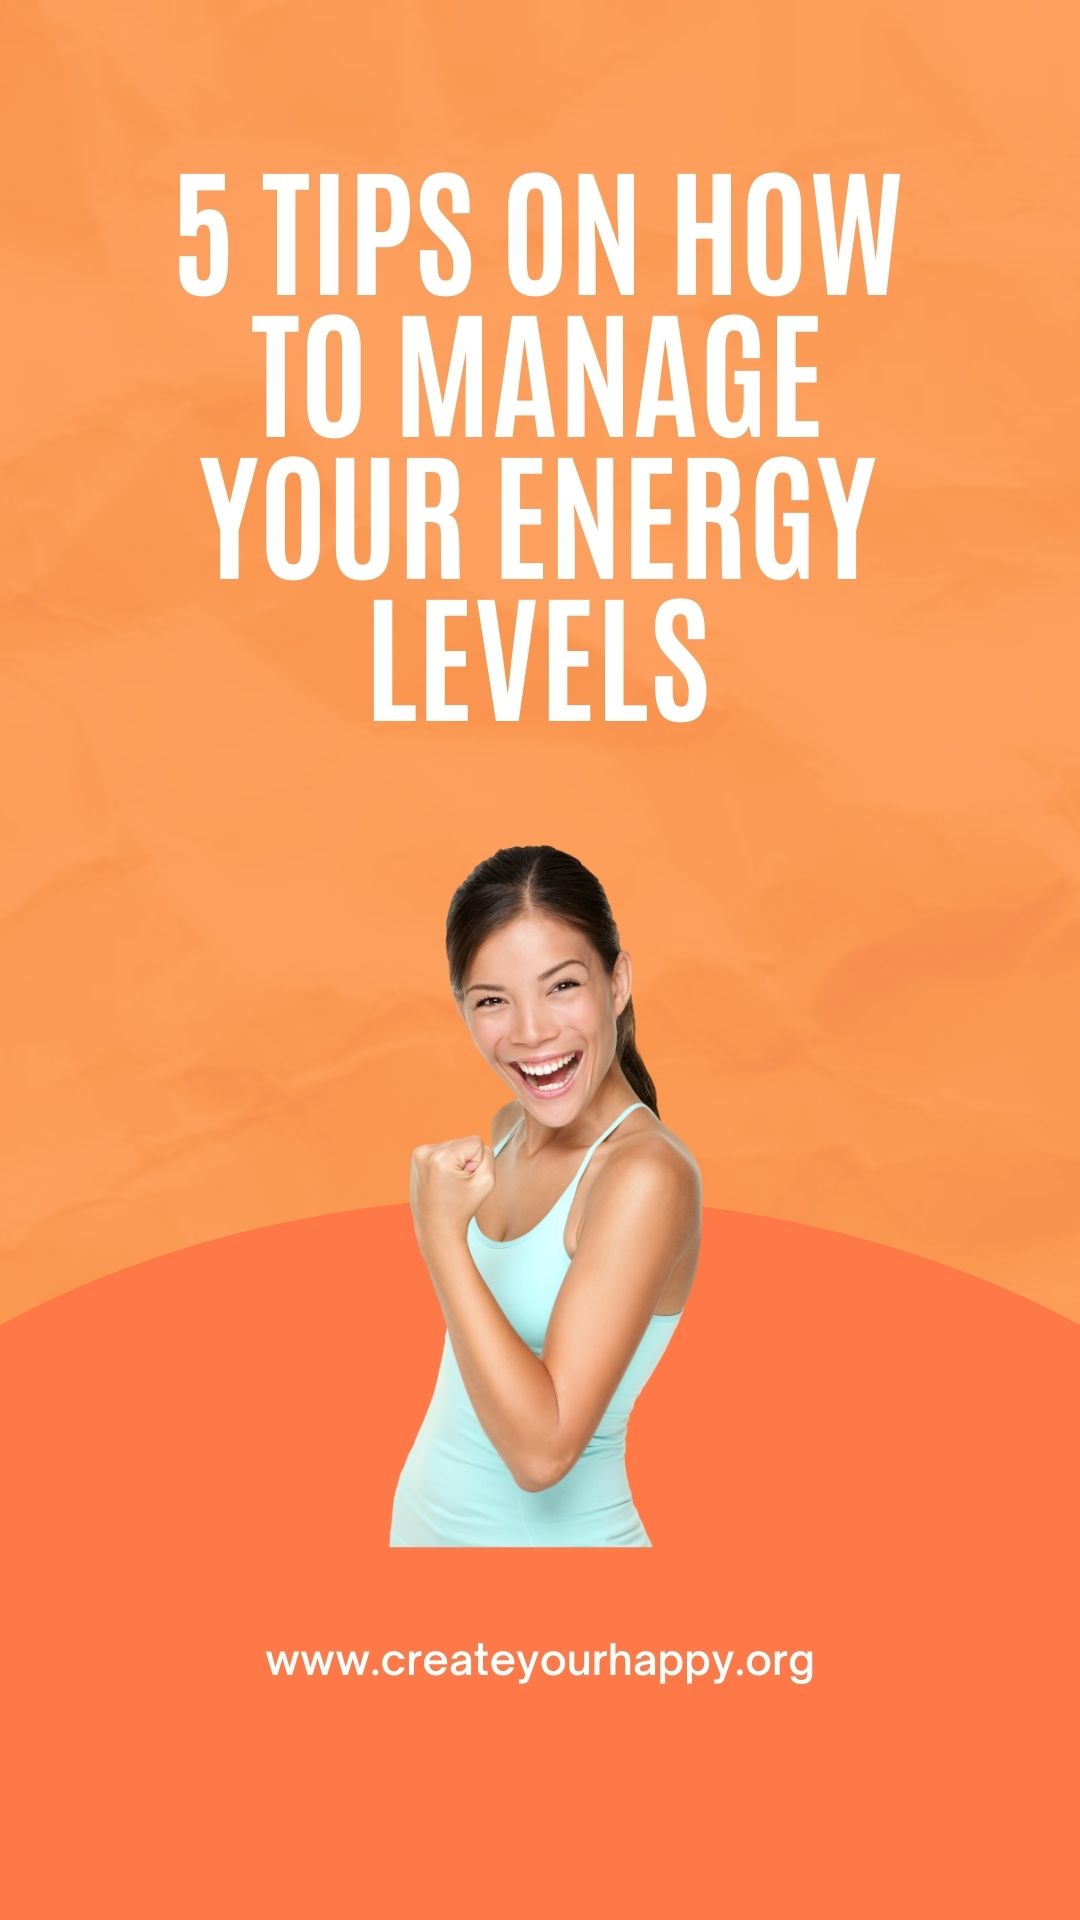 5 Tips on How to Manage Your Energy Levels